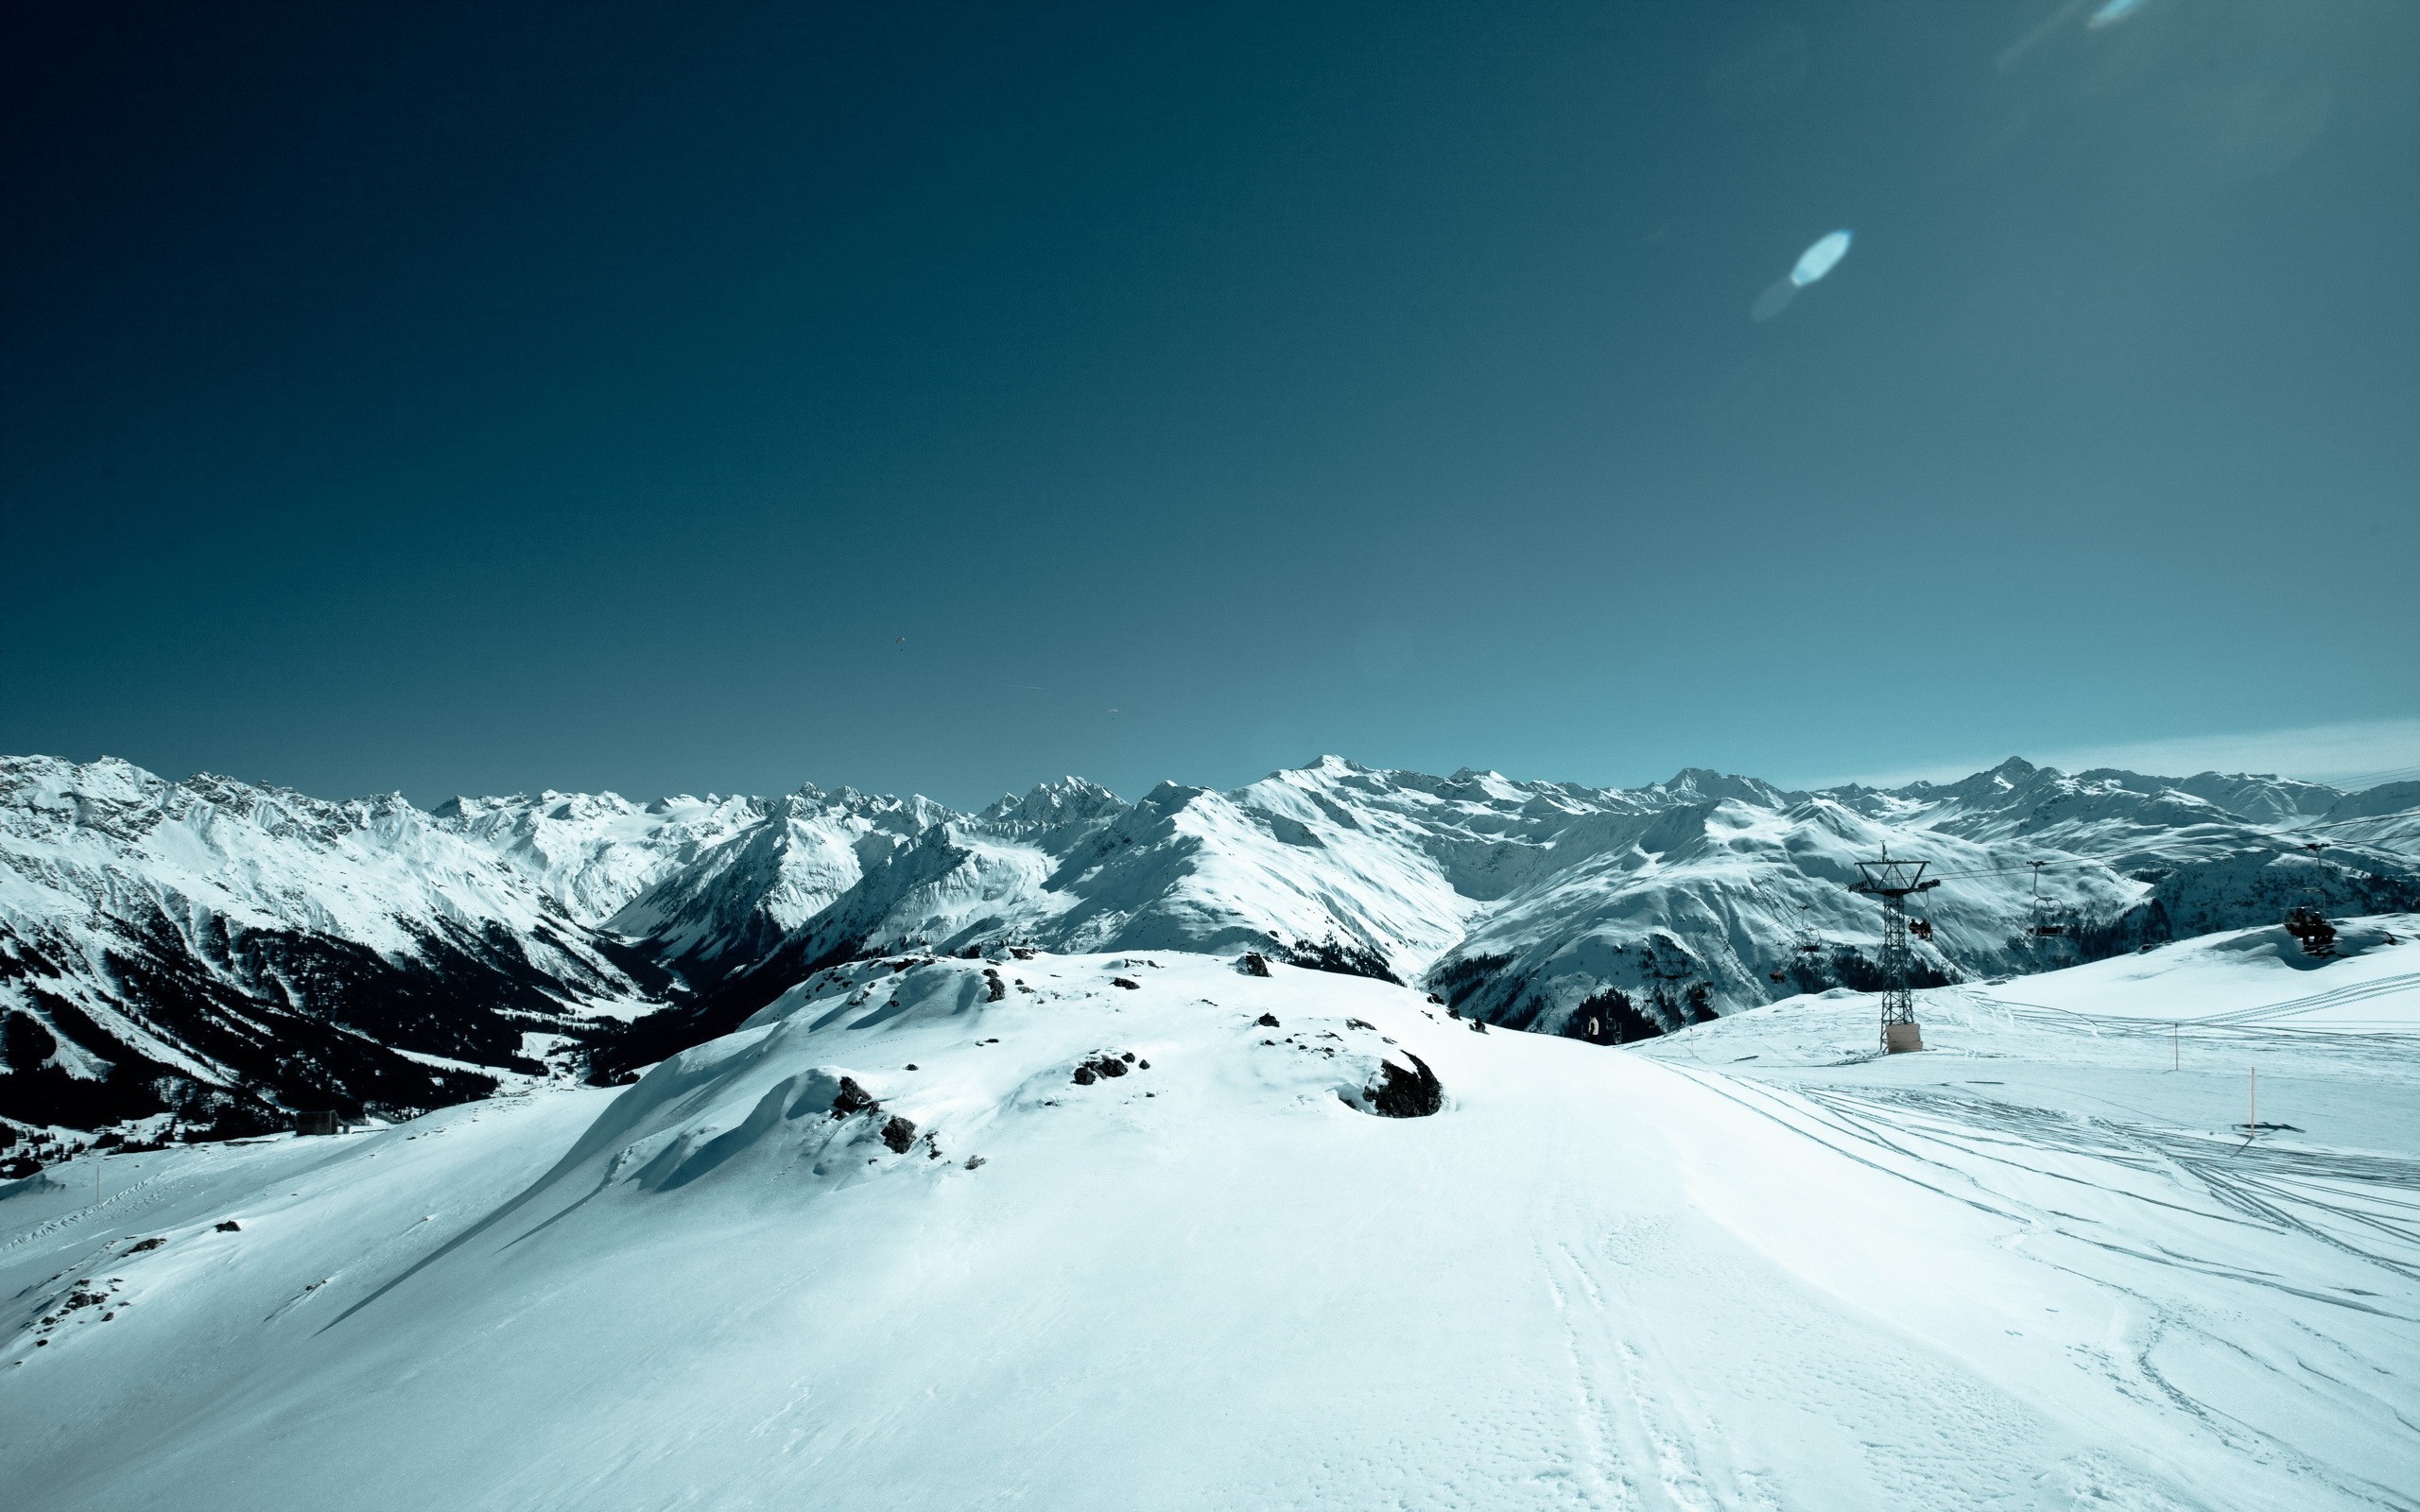 General 2560x1600 landscape nature sky snow mountains snowy peak clear sky lens flare